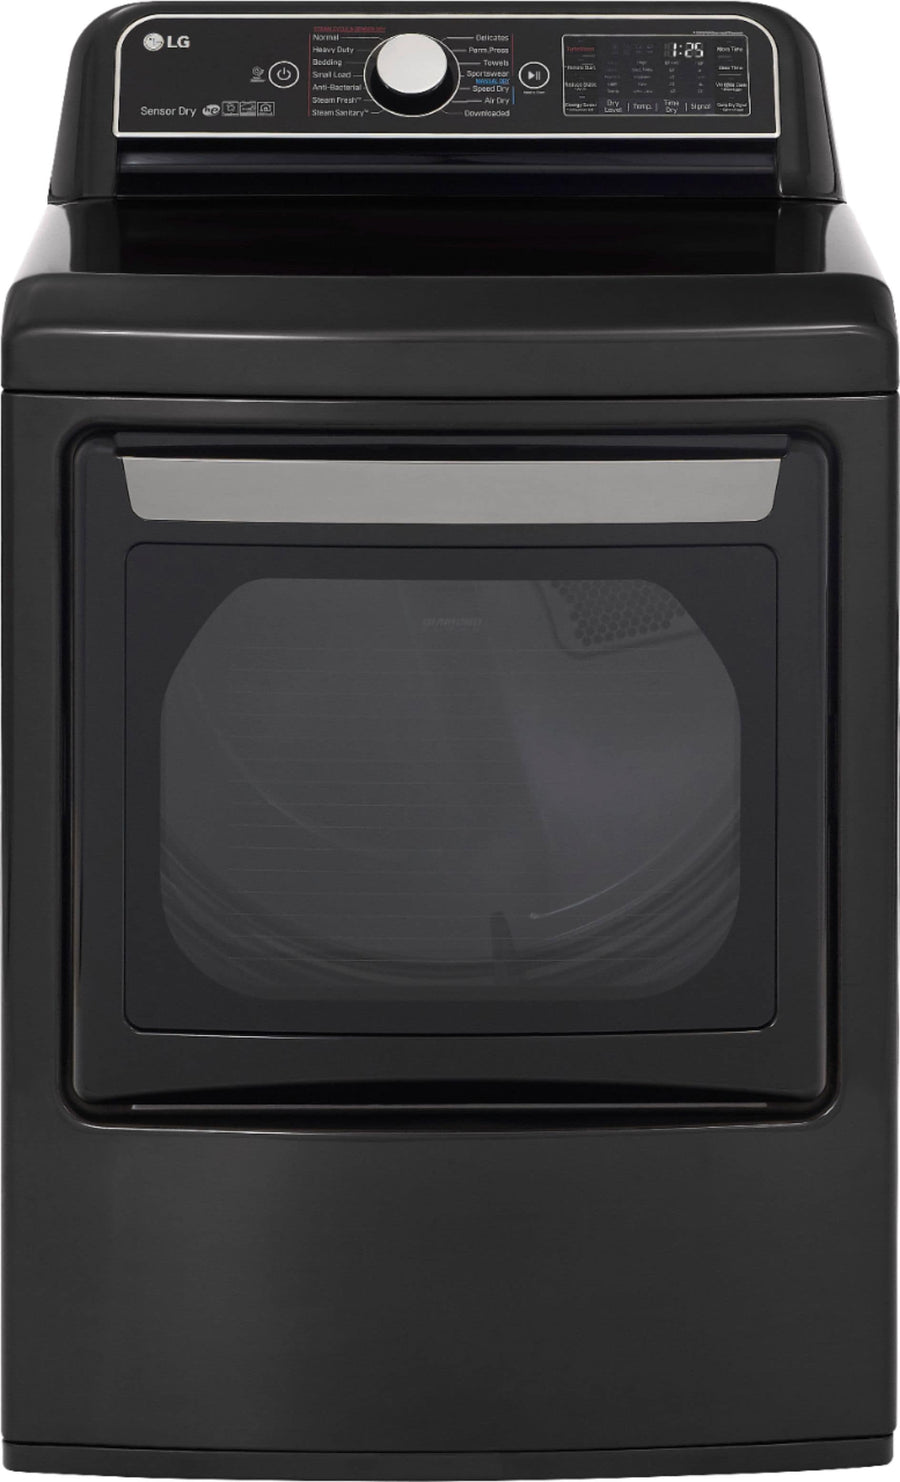 LG - 7.3 Cu. Ft. Smart Electric Dryer with Steam and Sensor Dry - Black steel_0